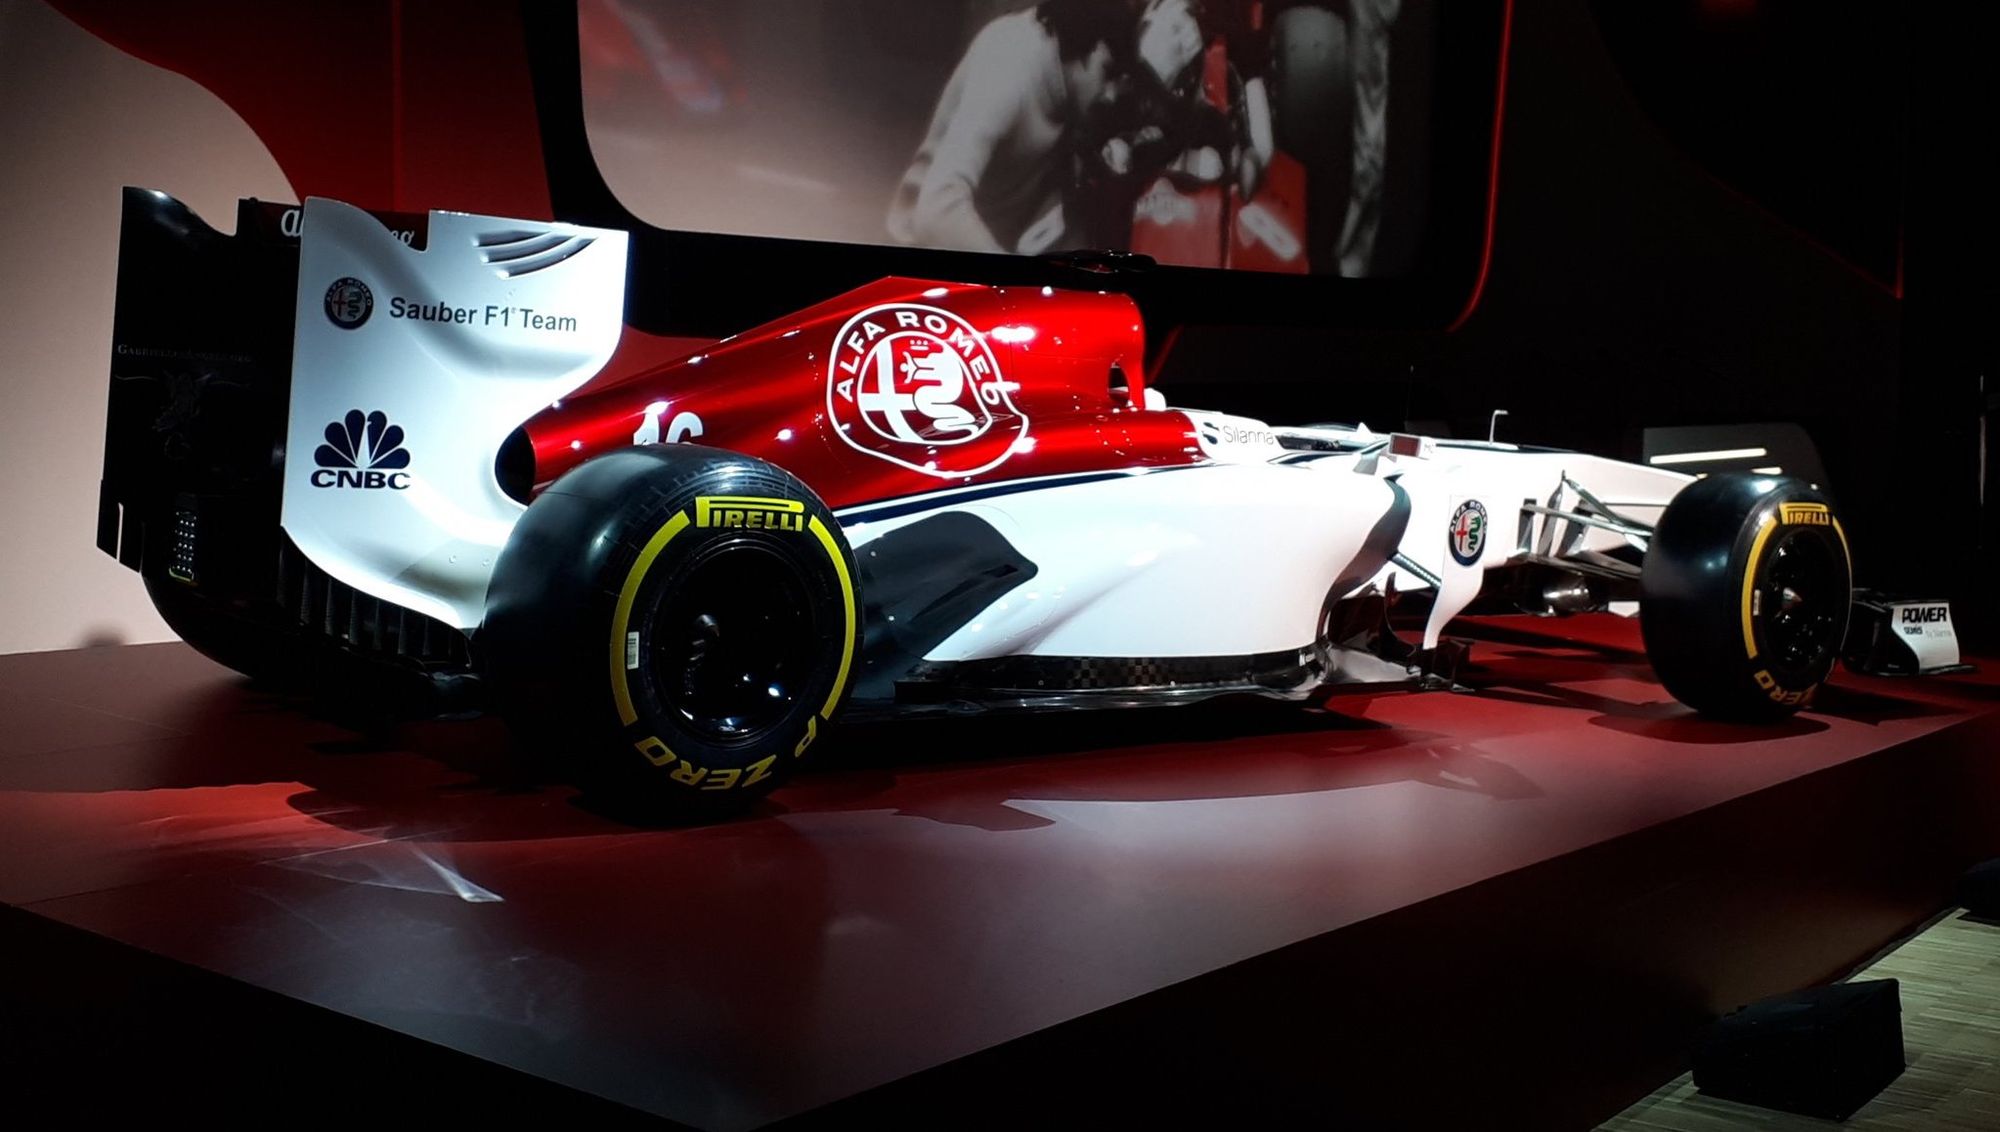 Sauber has released a livery concept for its new Alfa Romeo partnership